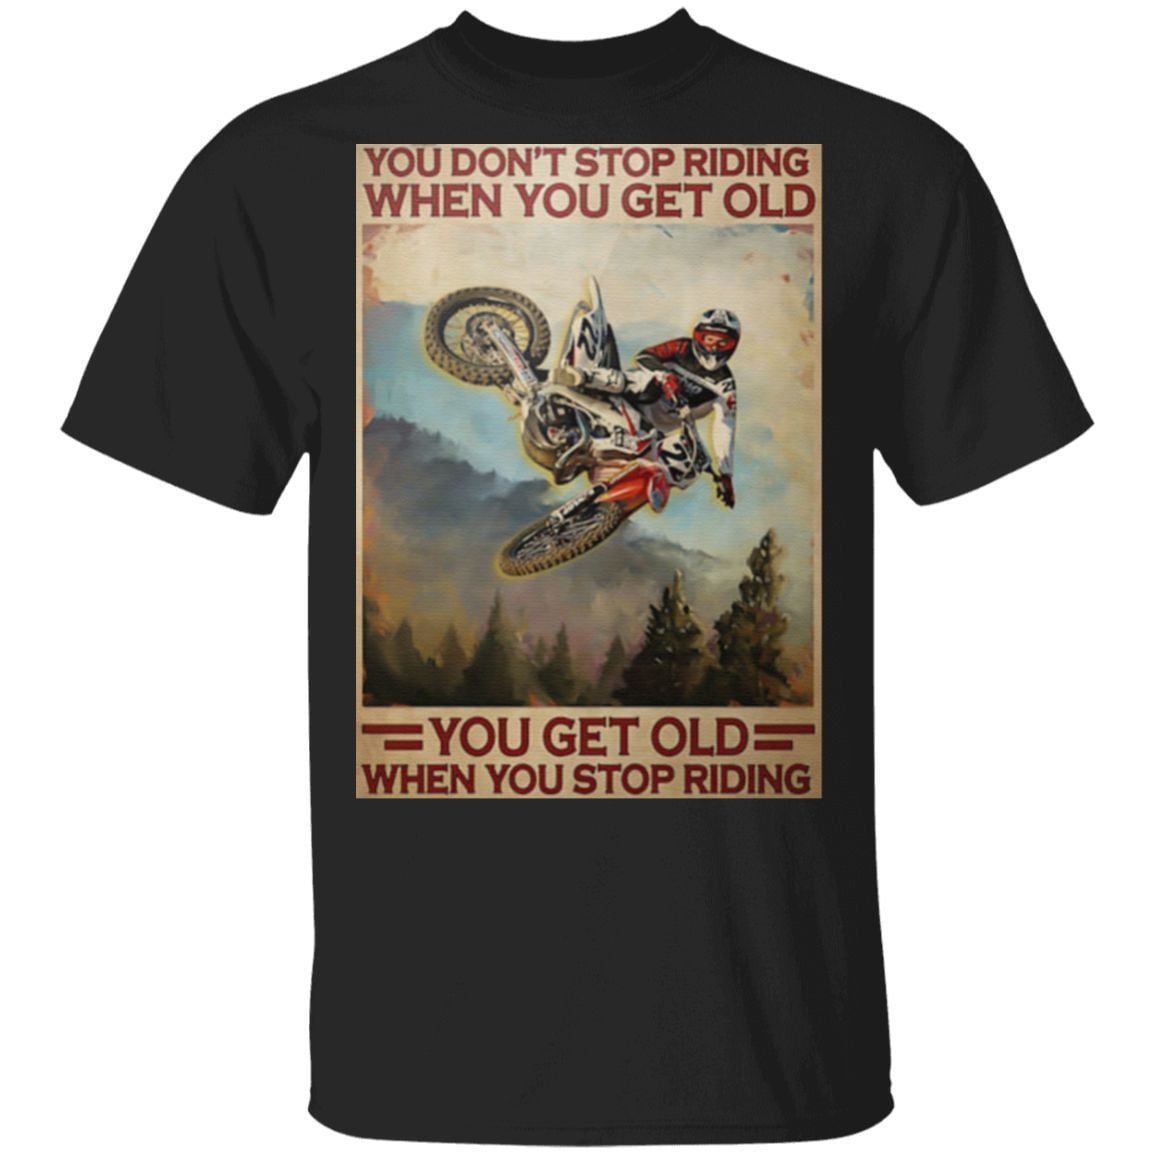 Motocross you don’t stop riding when you get old t shirt